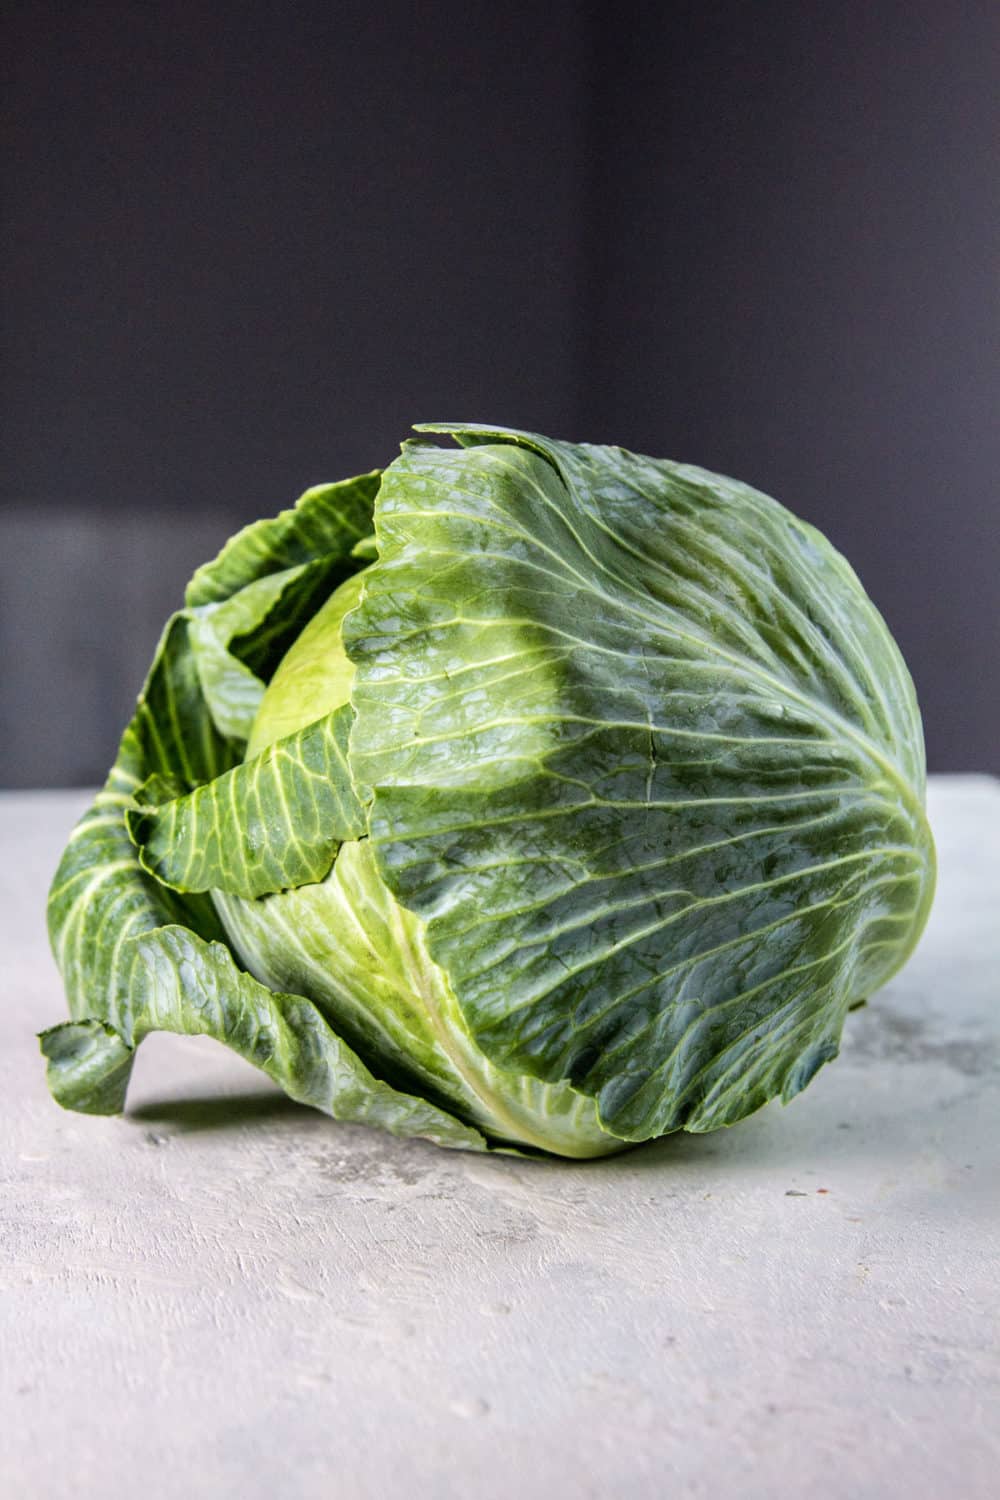 A head of green cabbage.